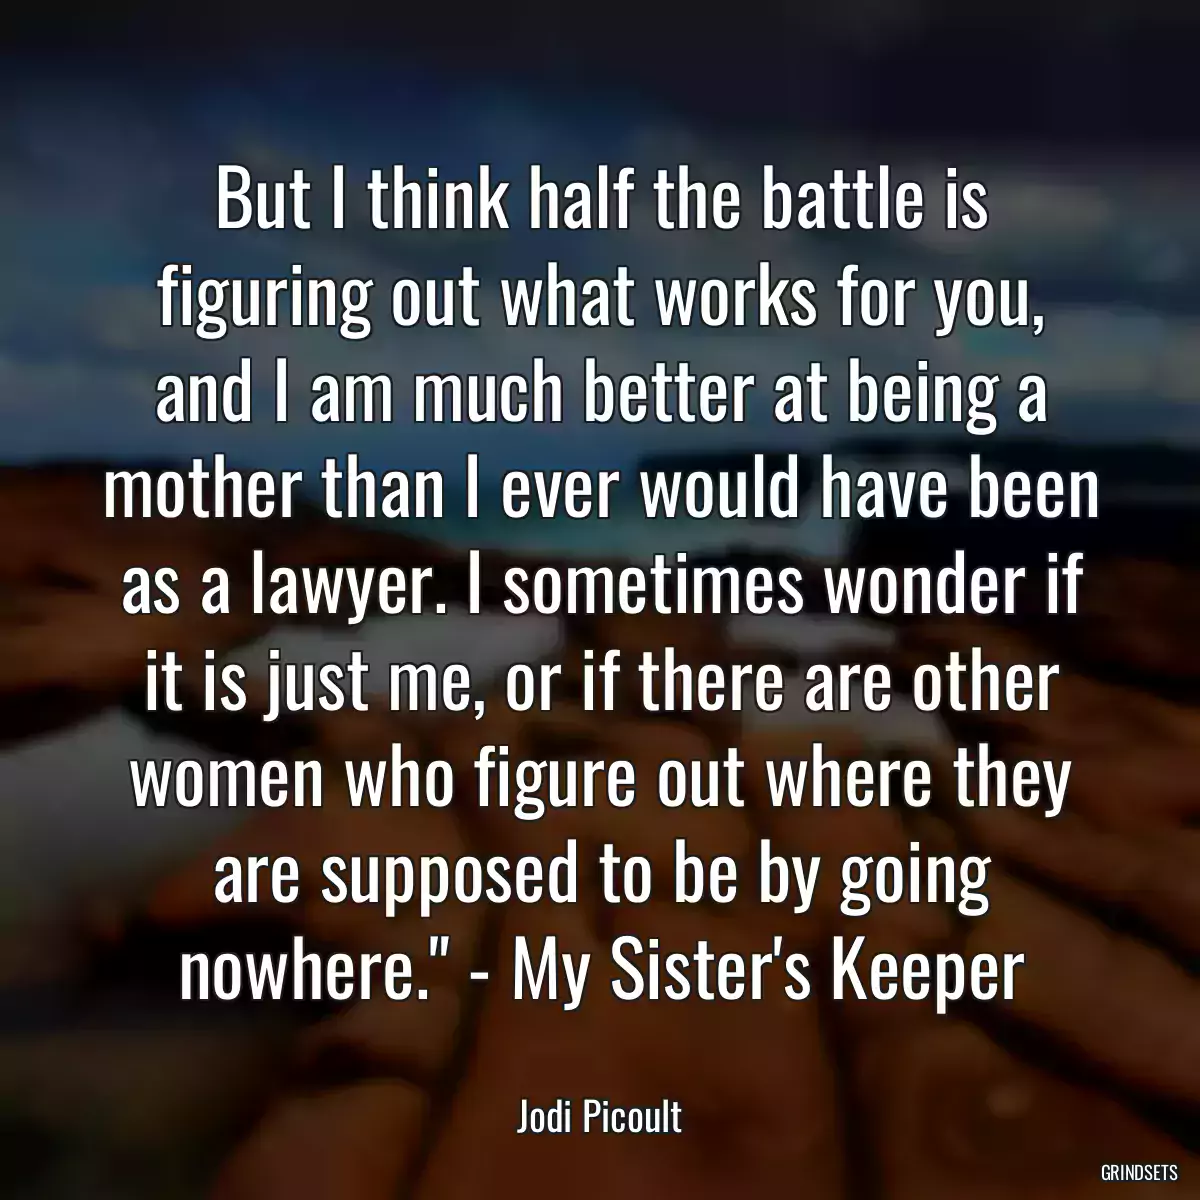 But I think half the battle is figuring out what works for you, and I am much better at being a mother than I ever would have been as a lawyer. I sometimes wonder if it is just me, or if there are other women who figure out where they are supposed to be by going nowhere.\